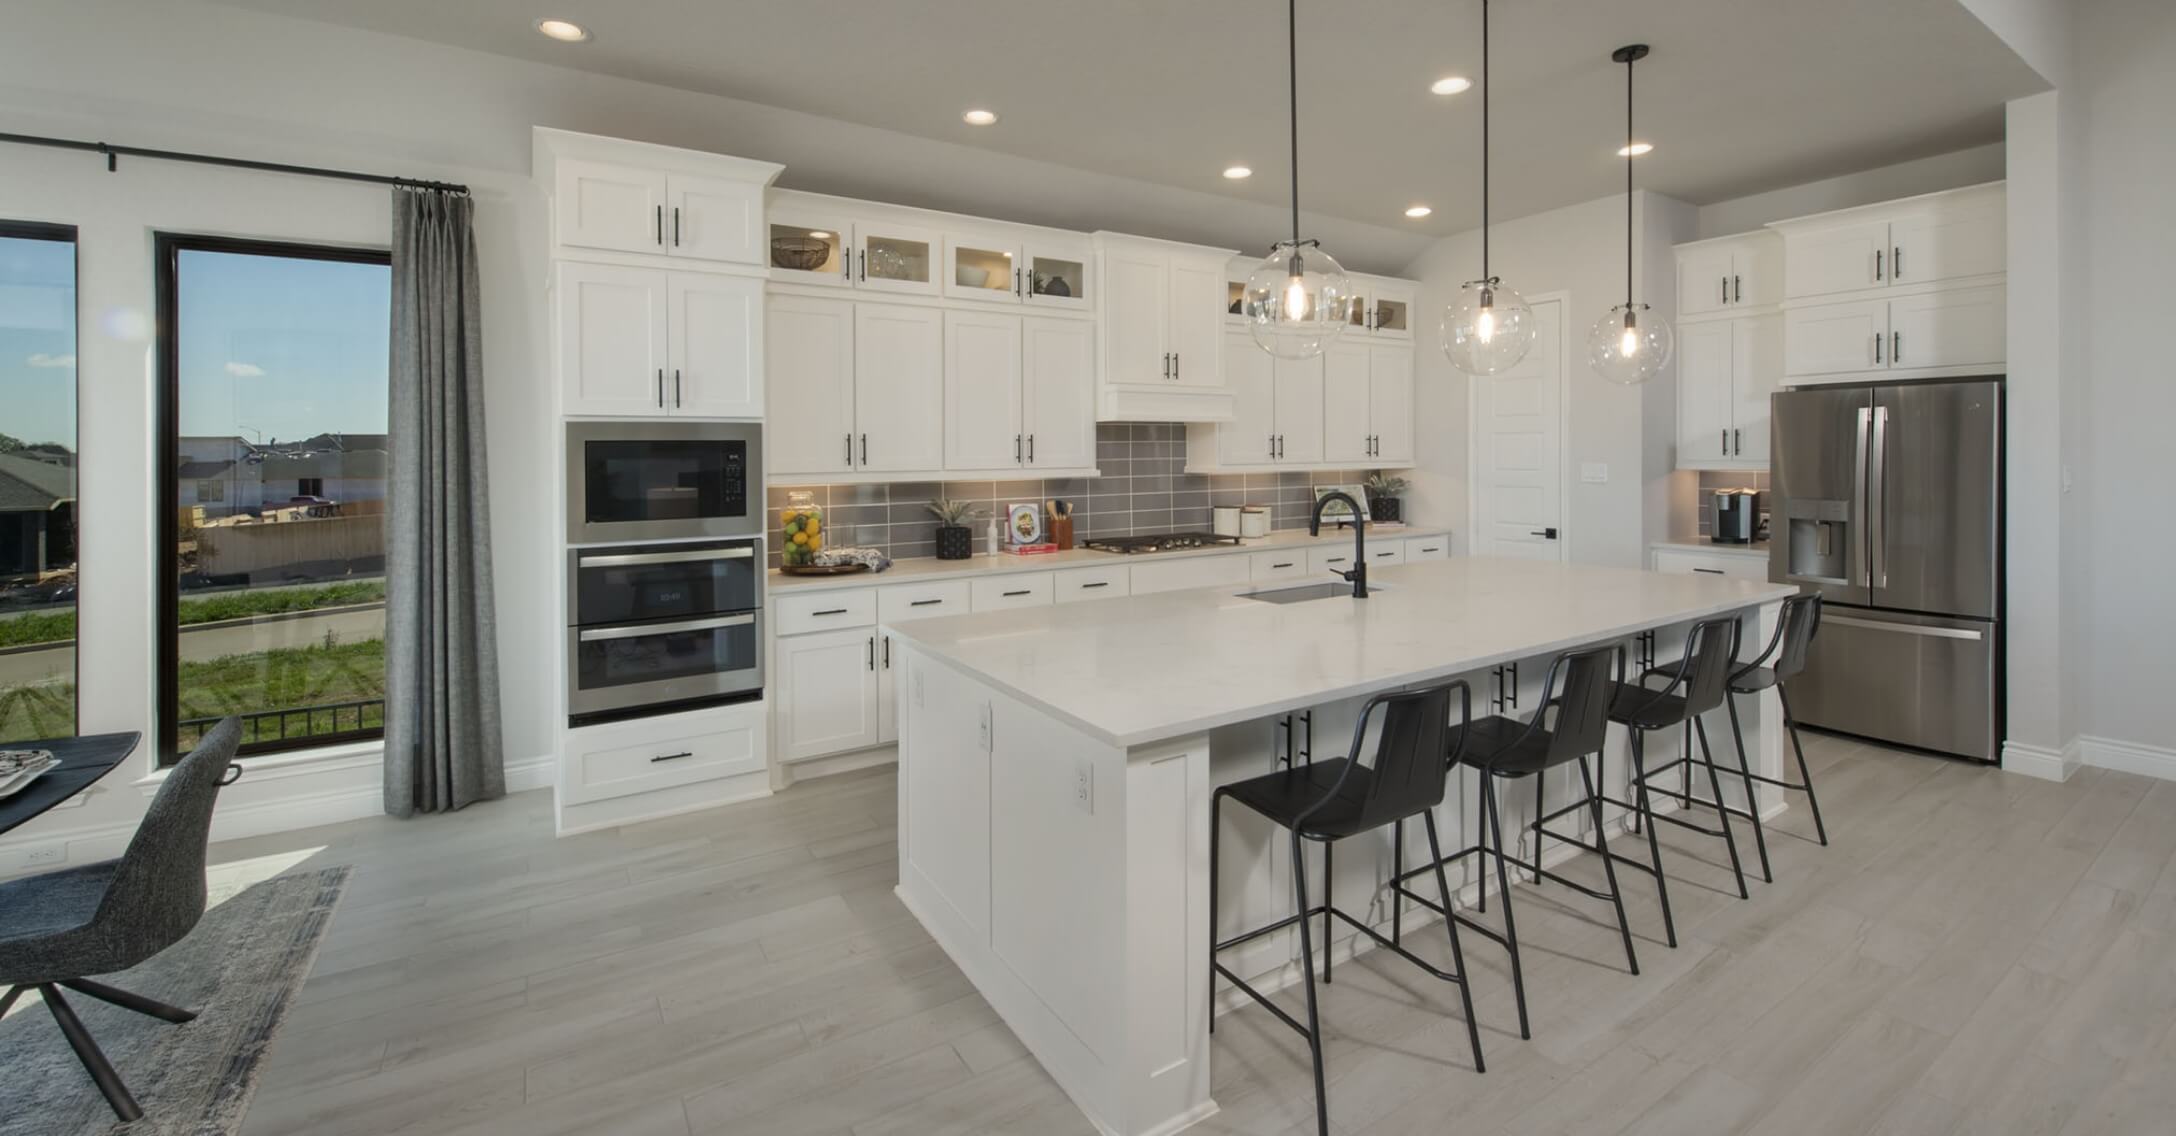 A white kitchen with stainless steel appliances and bar stools in new homes in New Braunfels Texas.